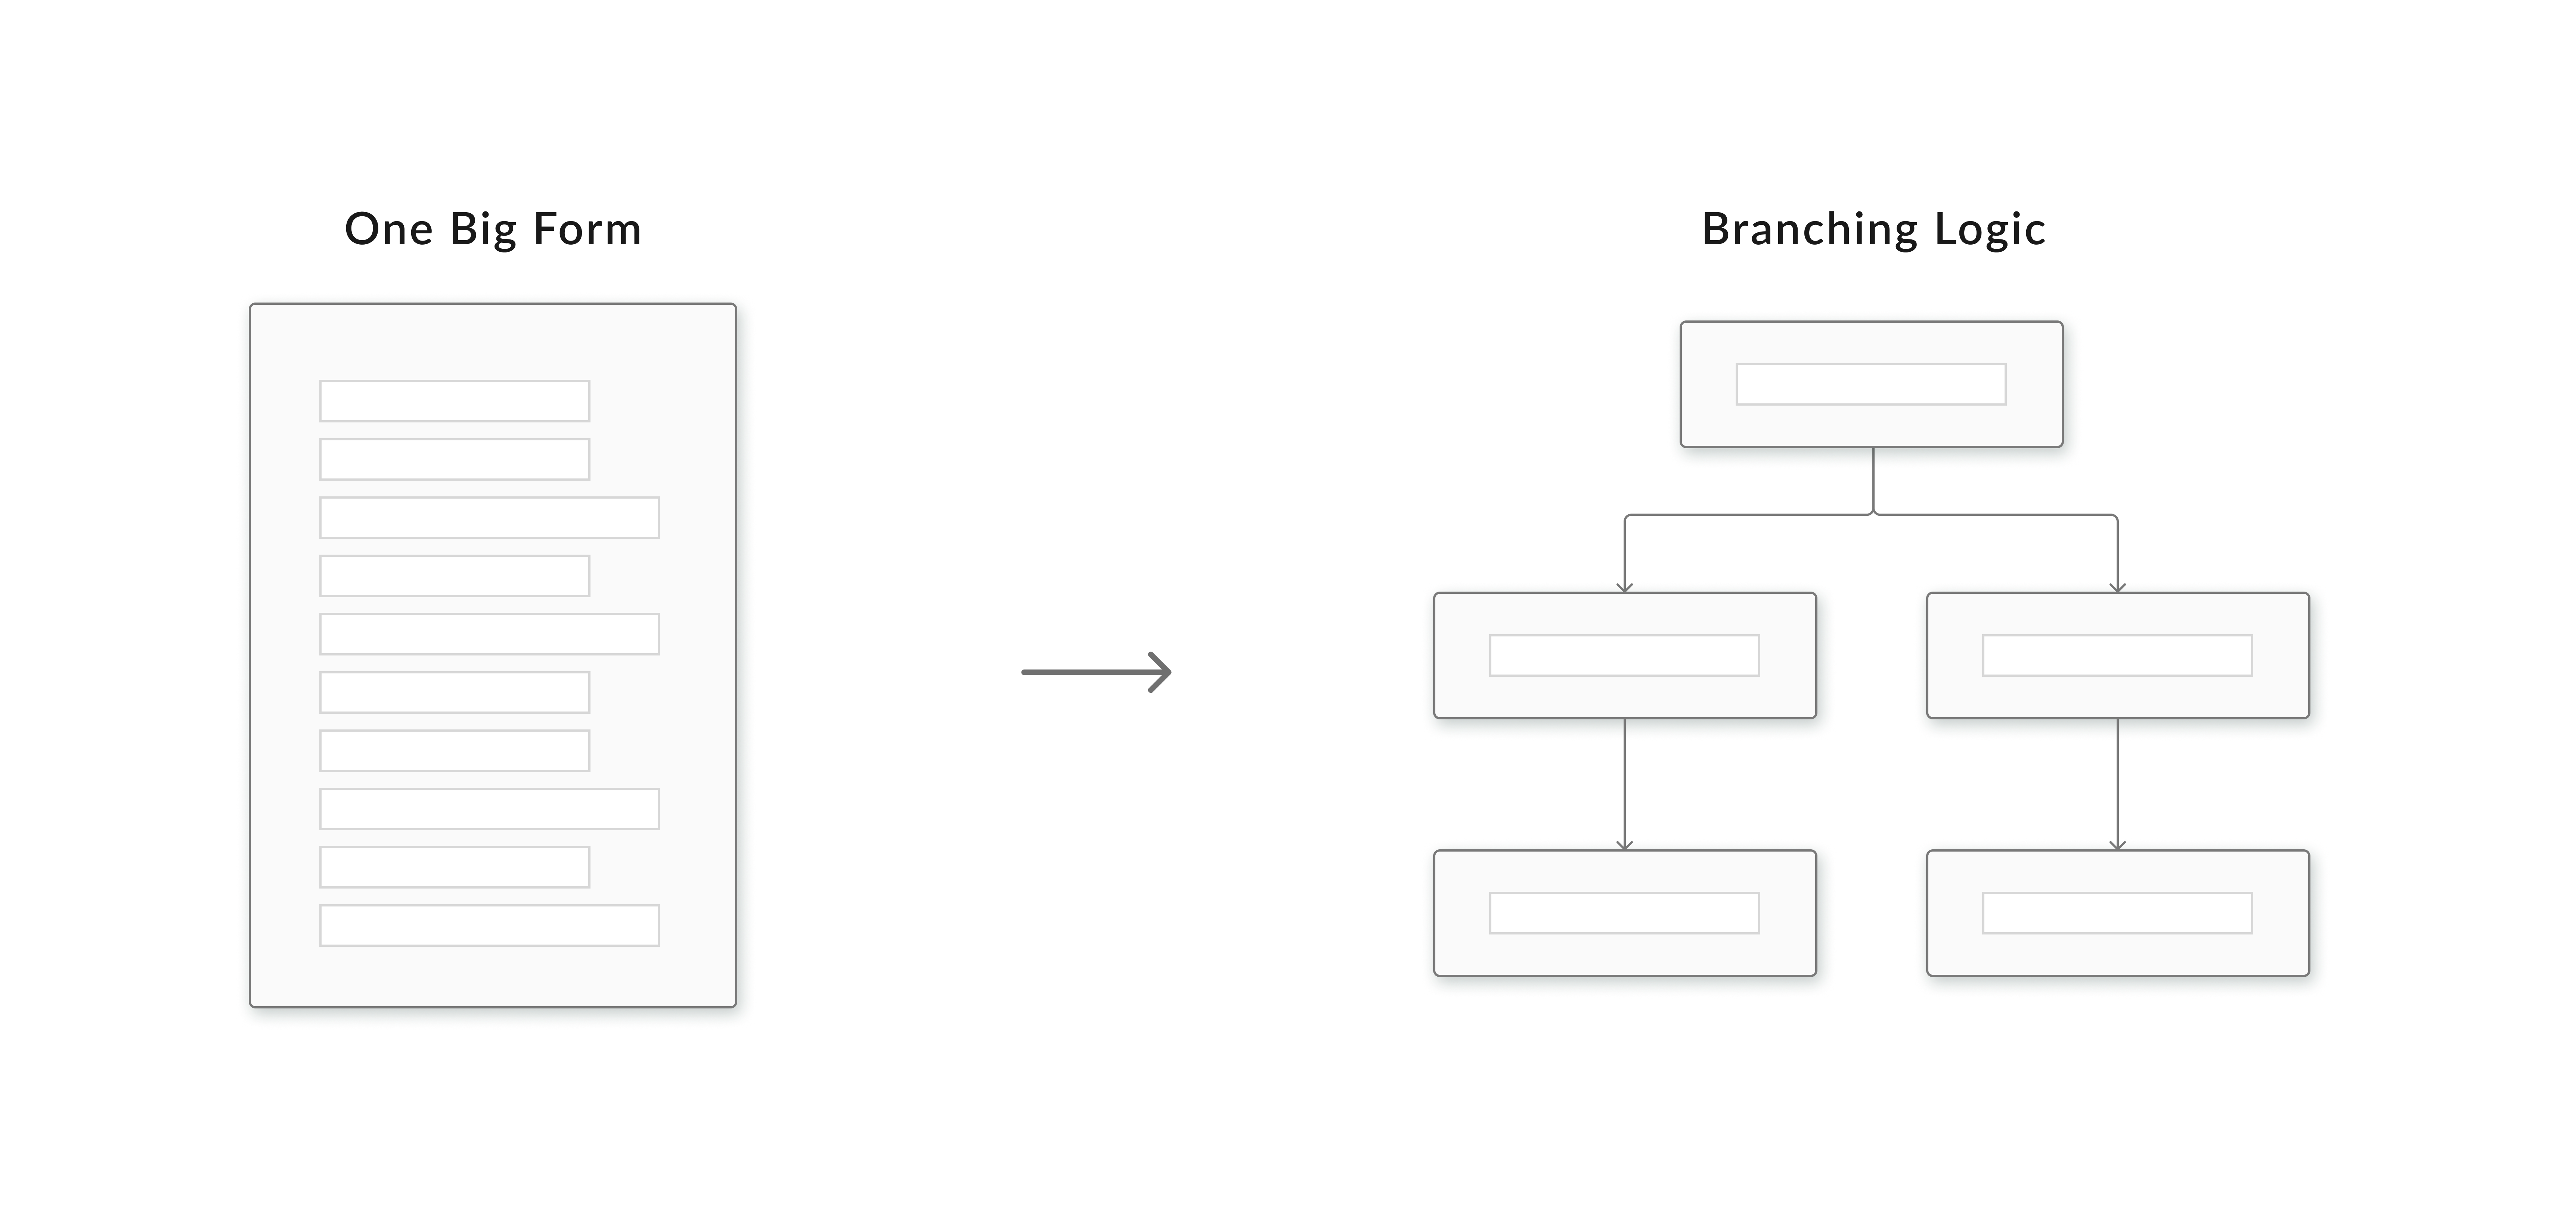 An illustration of the original form, in one long list, and the redesigned product with branching logic